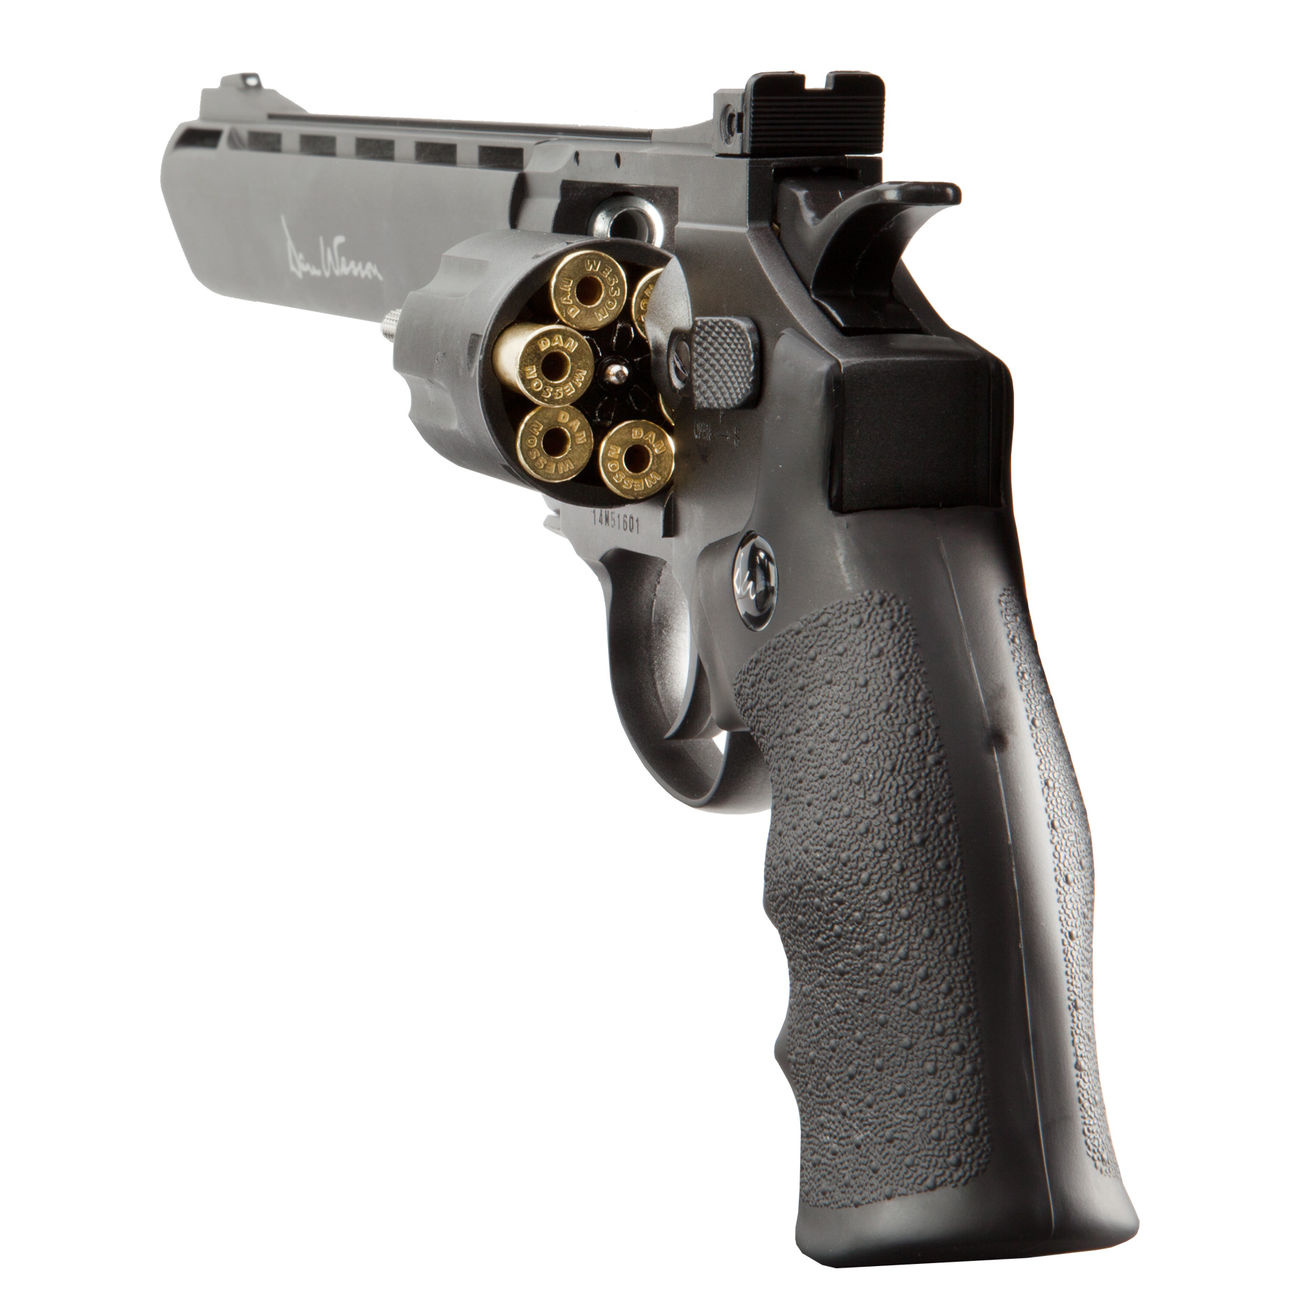 ASG 8 inch Dan Wesson Revolver Co2 NBB 2.70 Joule - BK